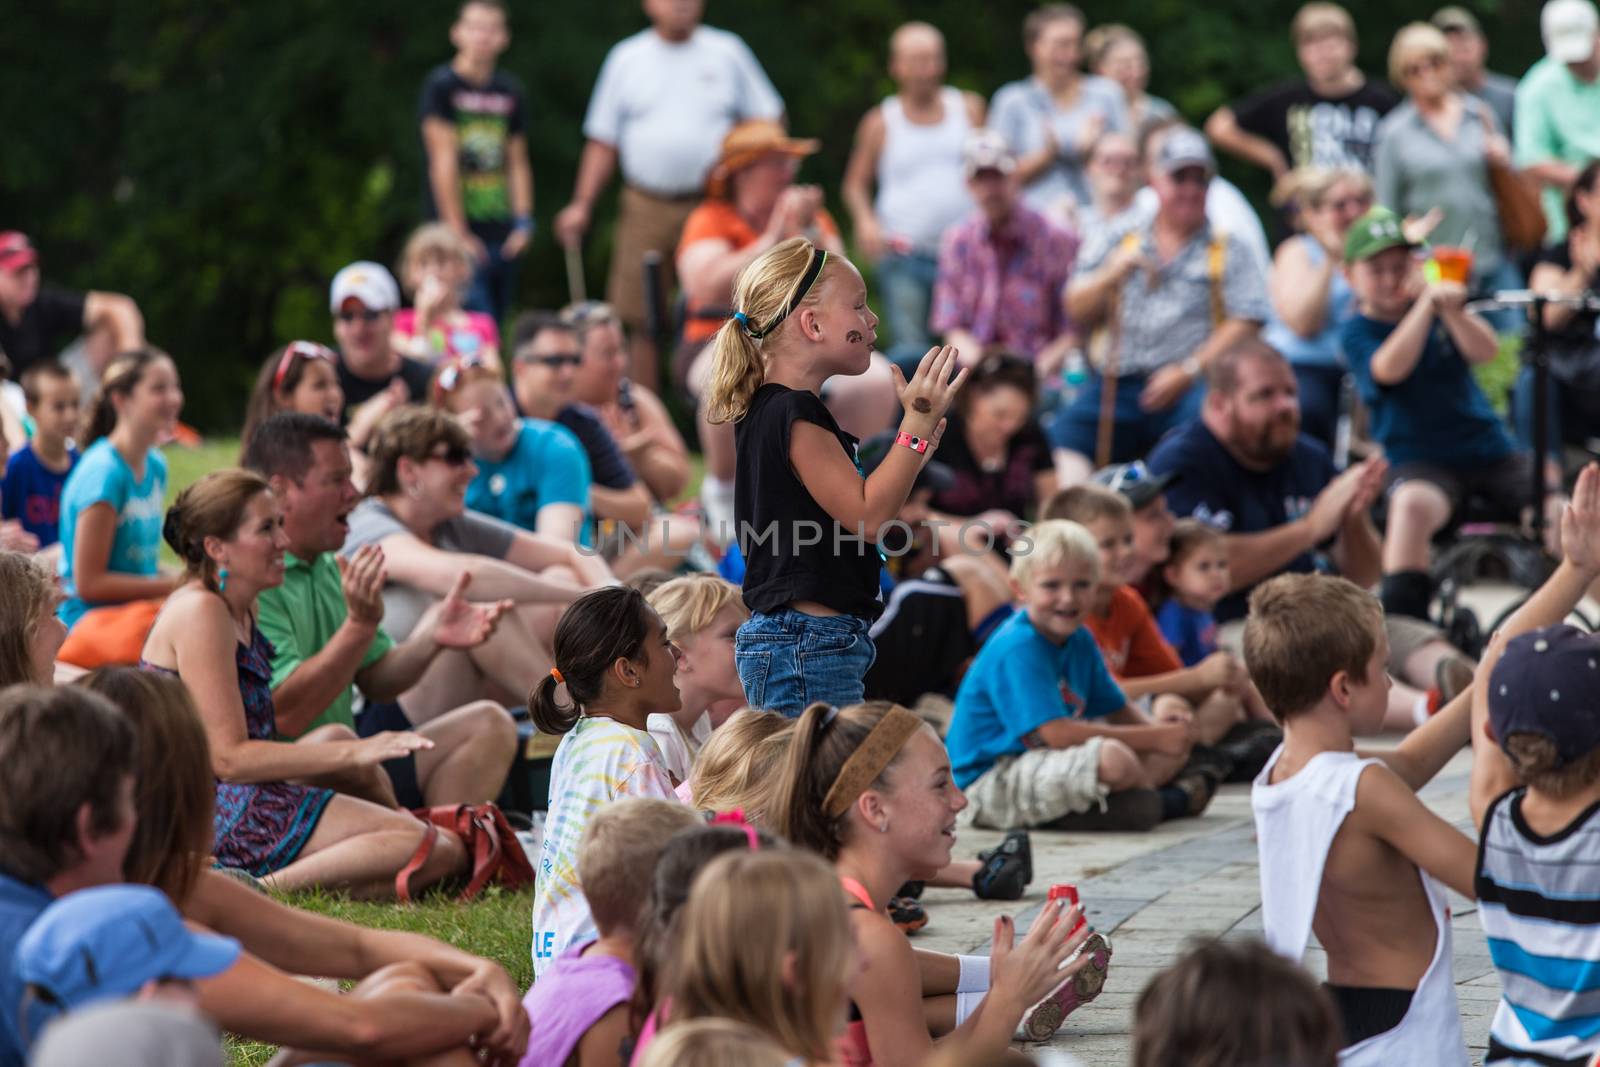 Show audience at the Iowa State Fair by Creatista